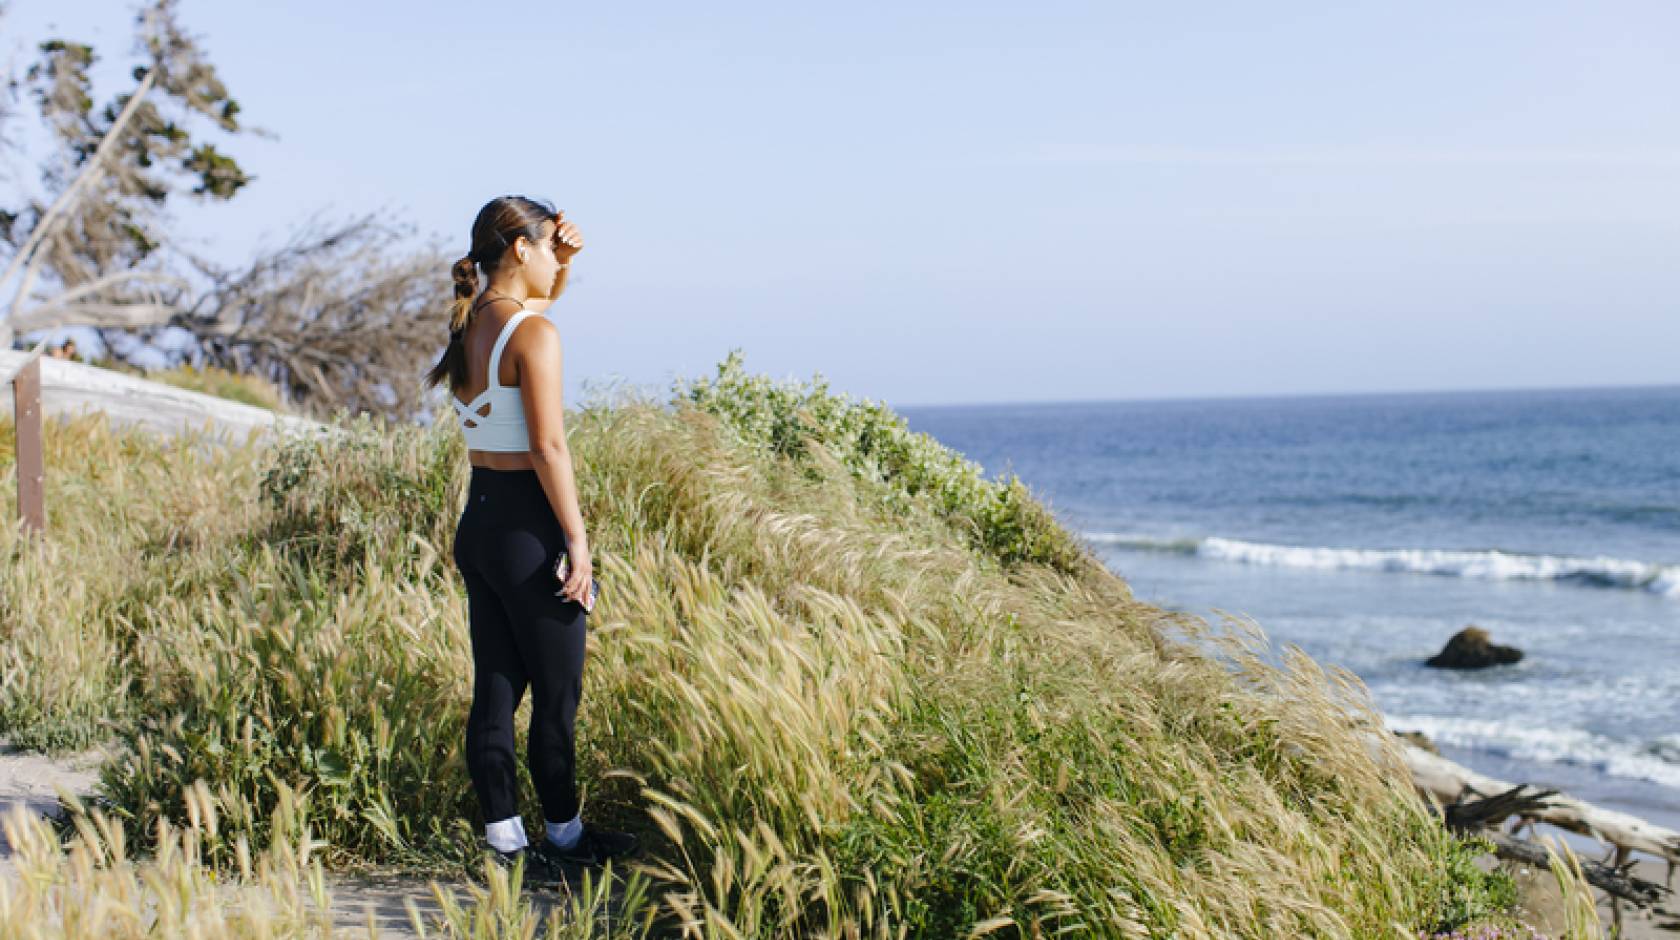 A young woman in exercise attire stands on a grassy bluff overlooking a beach, shading her eyes from the sun